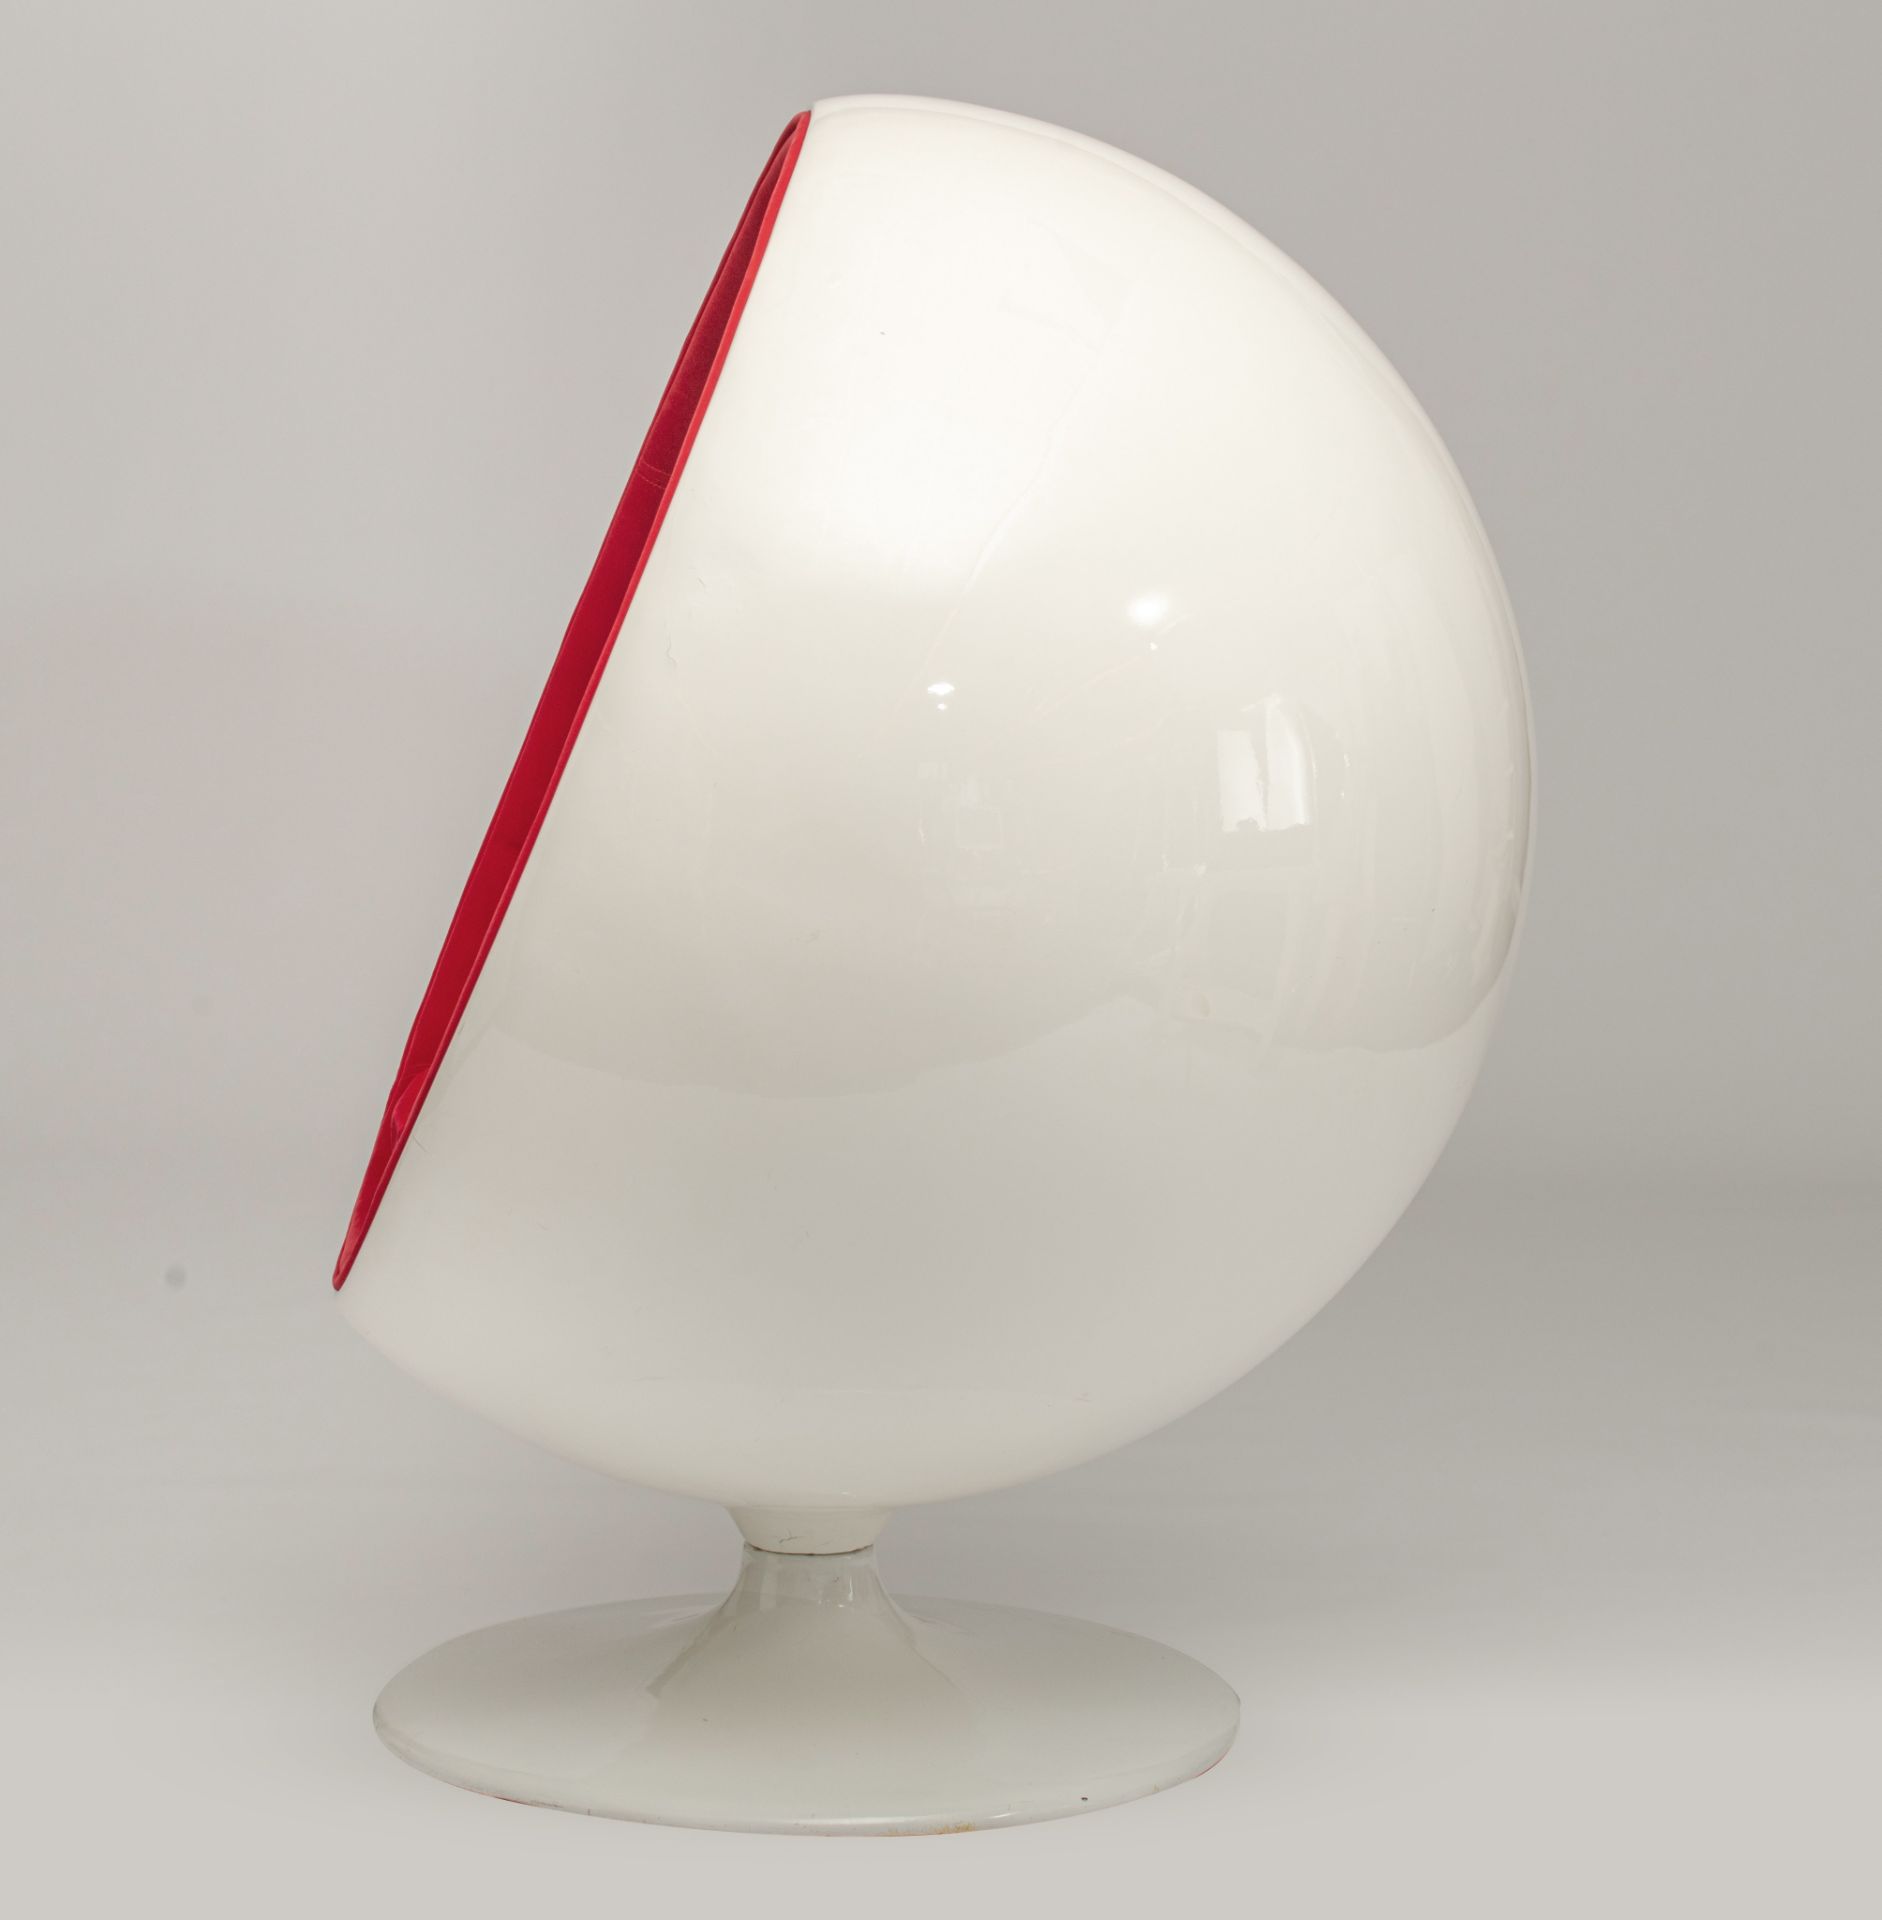 A Globe or Ball Chair by Eero Aarnio, Finland, 1966, H 120 cm - Image 4 of 16